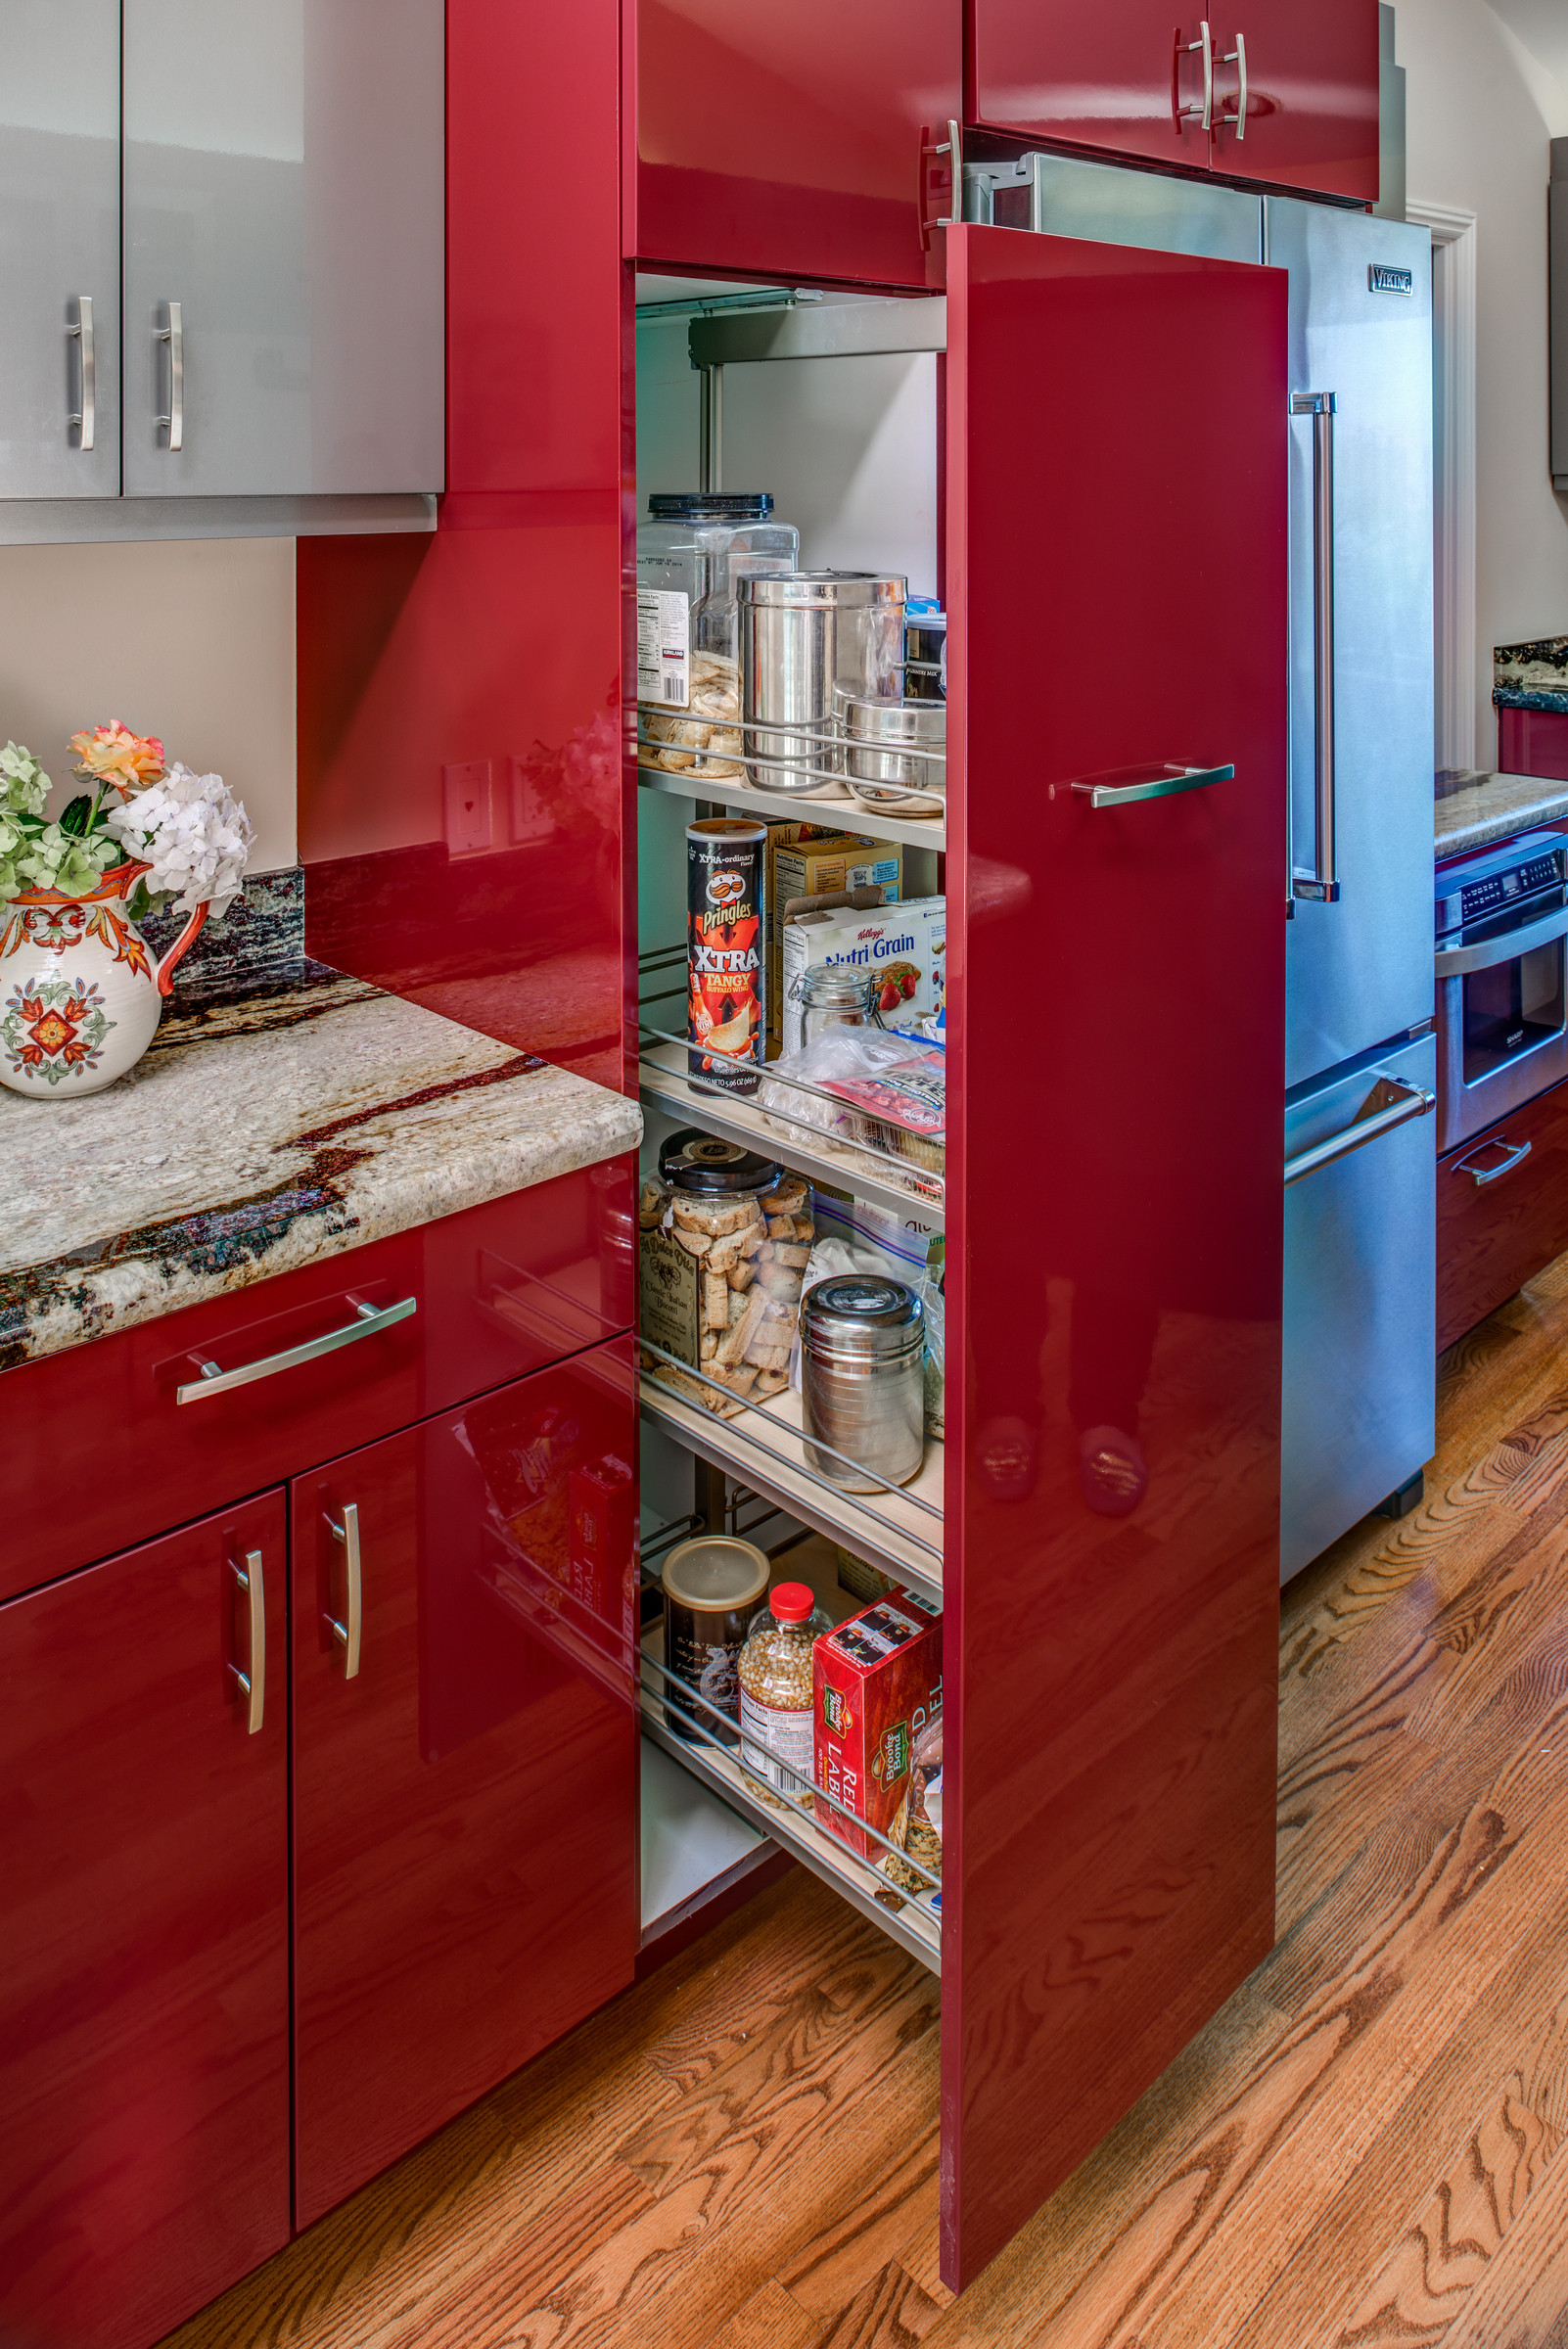 https://st.hzcdn.com/simgs/pictures/kitchens/ultra-contemporary-red-high-gloss-kitchen-designed-by-cynthia-collins-gilmans-kitchens-and-baths-img~2b31af1f03d98274_14-9992-1-aa5f6d2.jpg